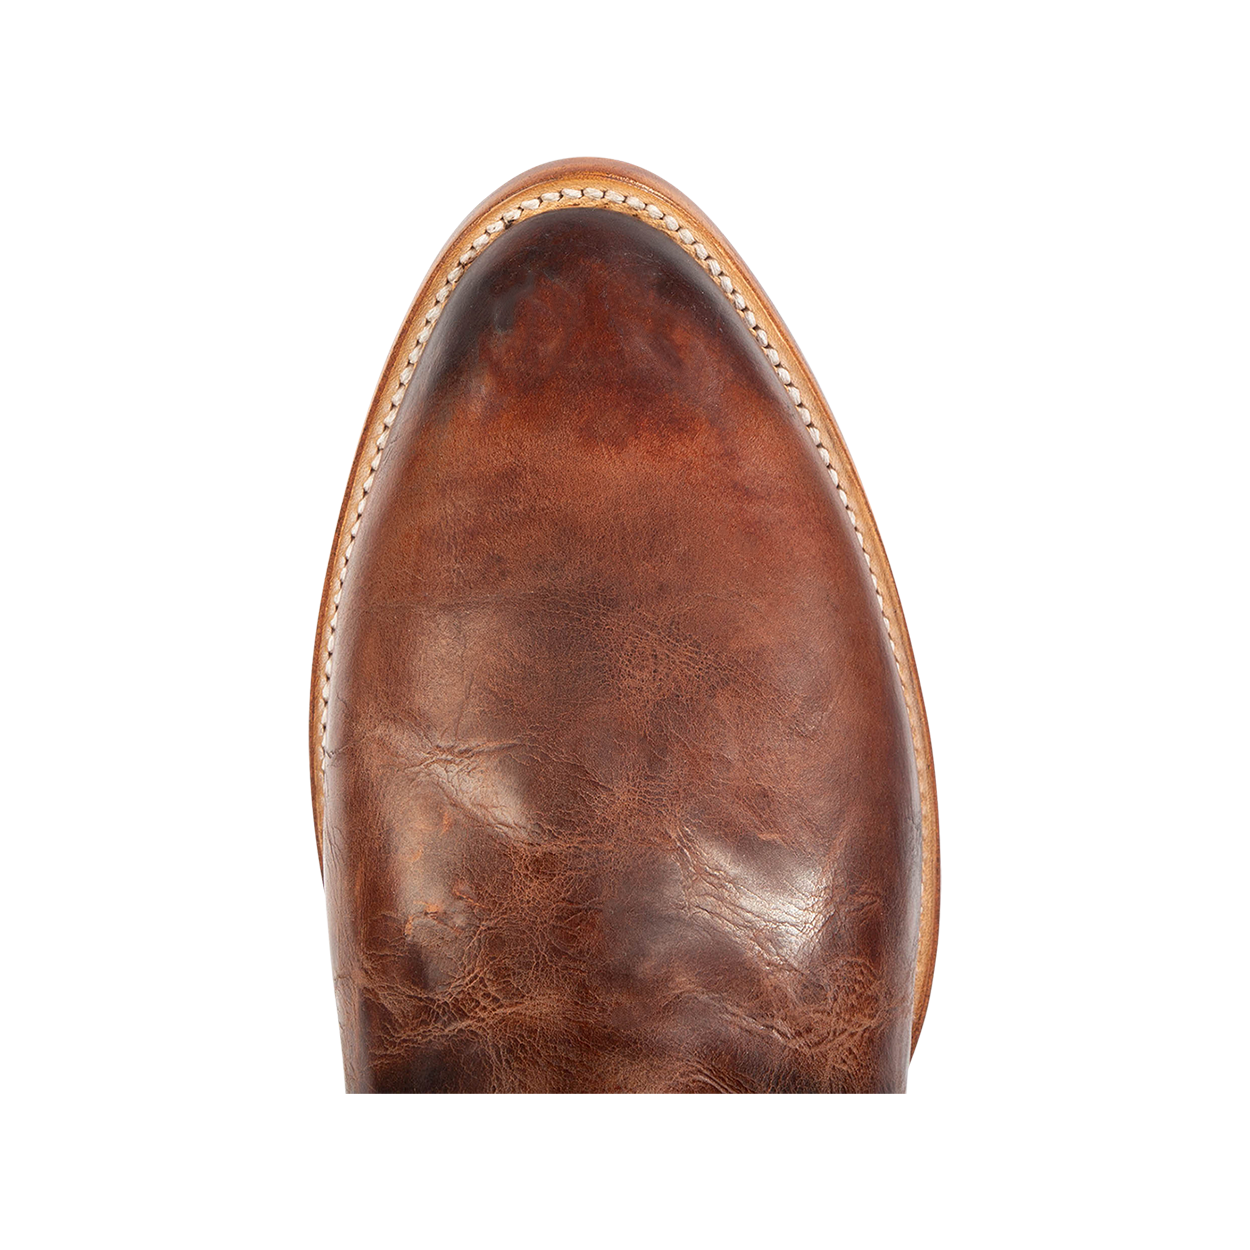 Top view showing traditional toe shape on FREEBIRD men's Outlaw rust boot